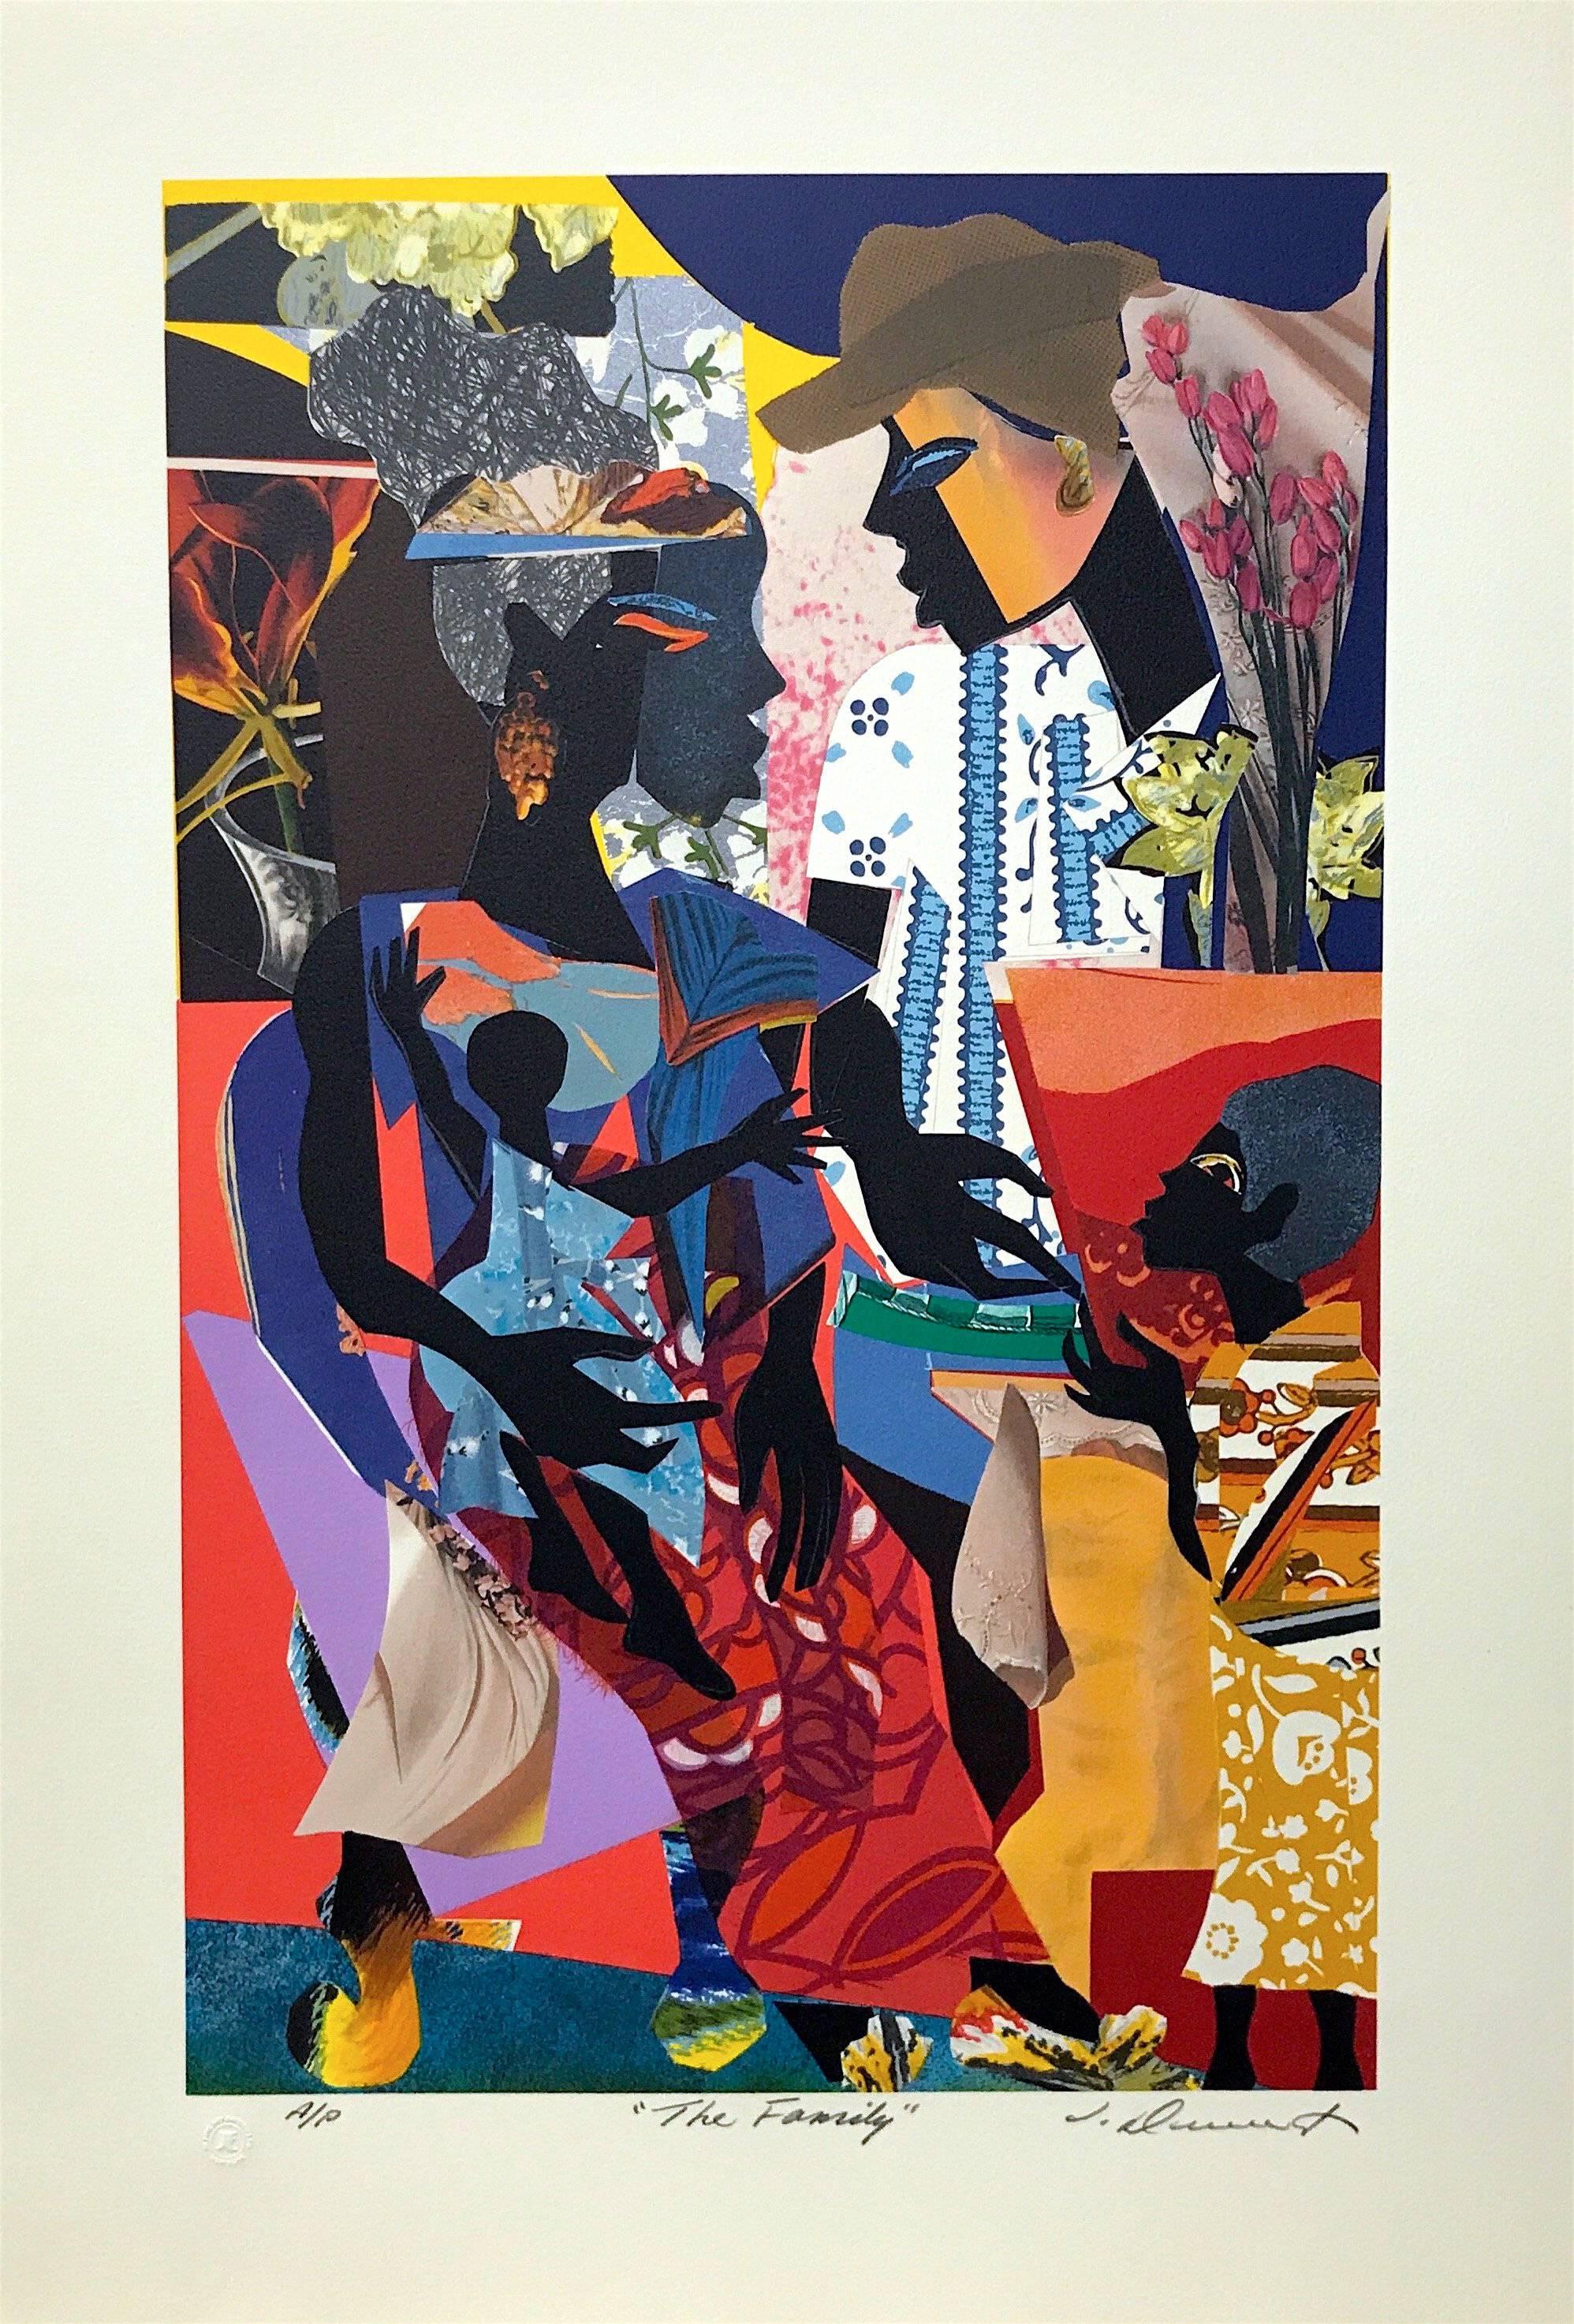 THE FAMILY, Signed Lithograph, Multicolor Collage, African American Heritage 1